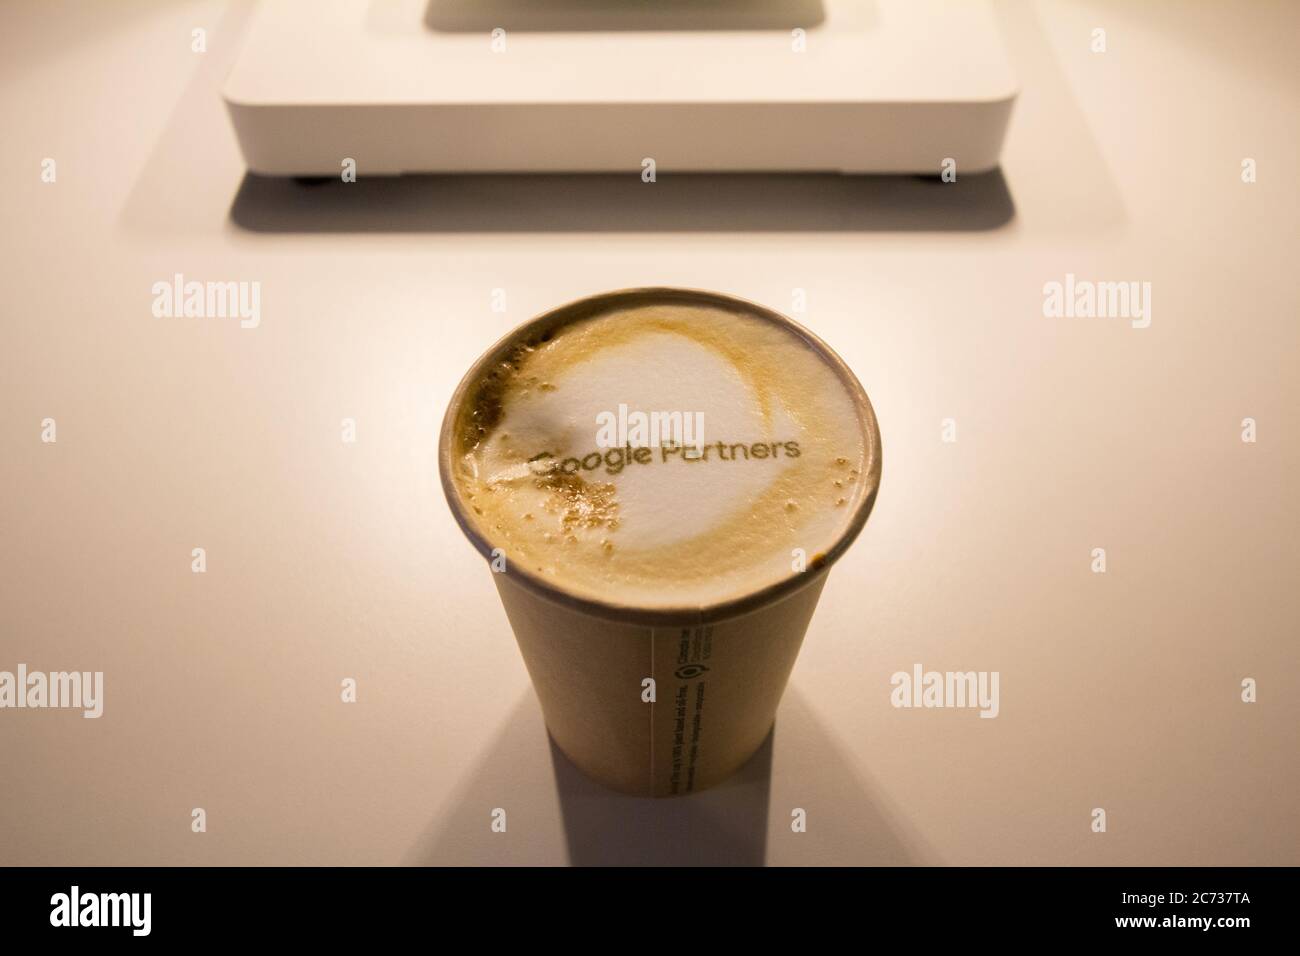 BUCHAREST, ROMANIA - FEBRUARY 12, 2020: Google Partners logo printed on a coffee. Google Partners is the agreement between Google and some marketing a Stock Photo